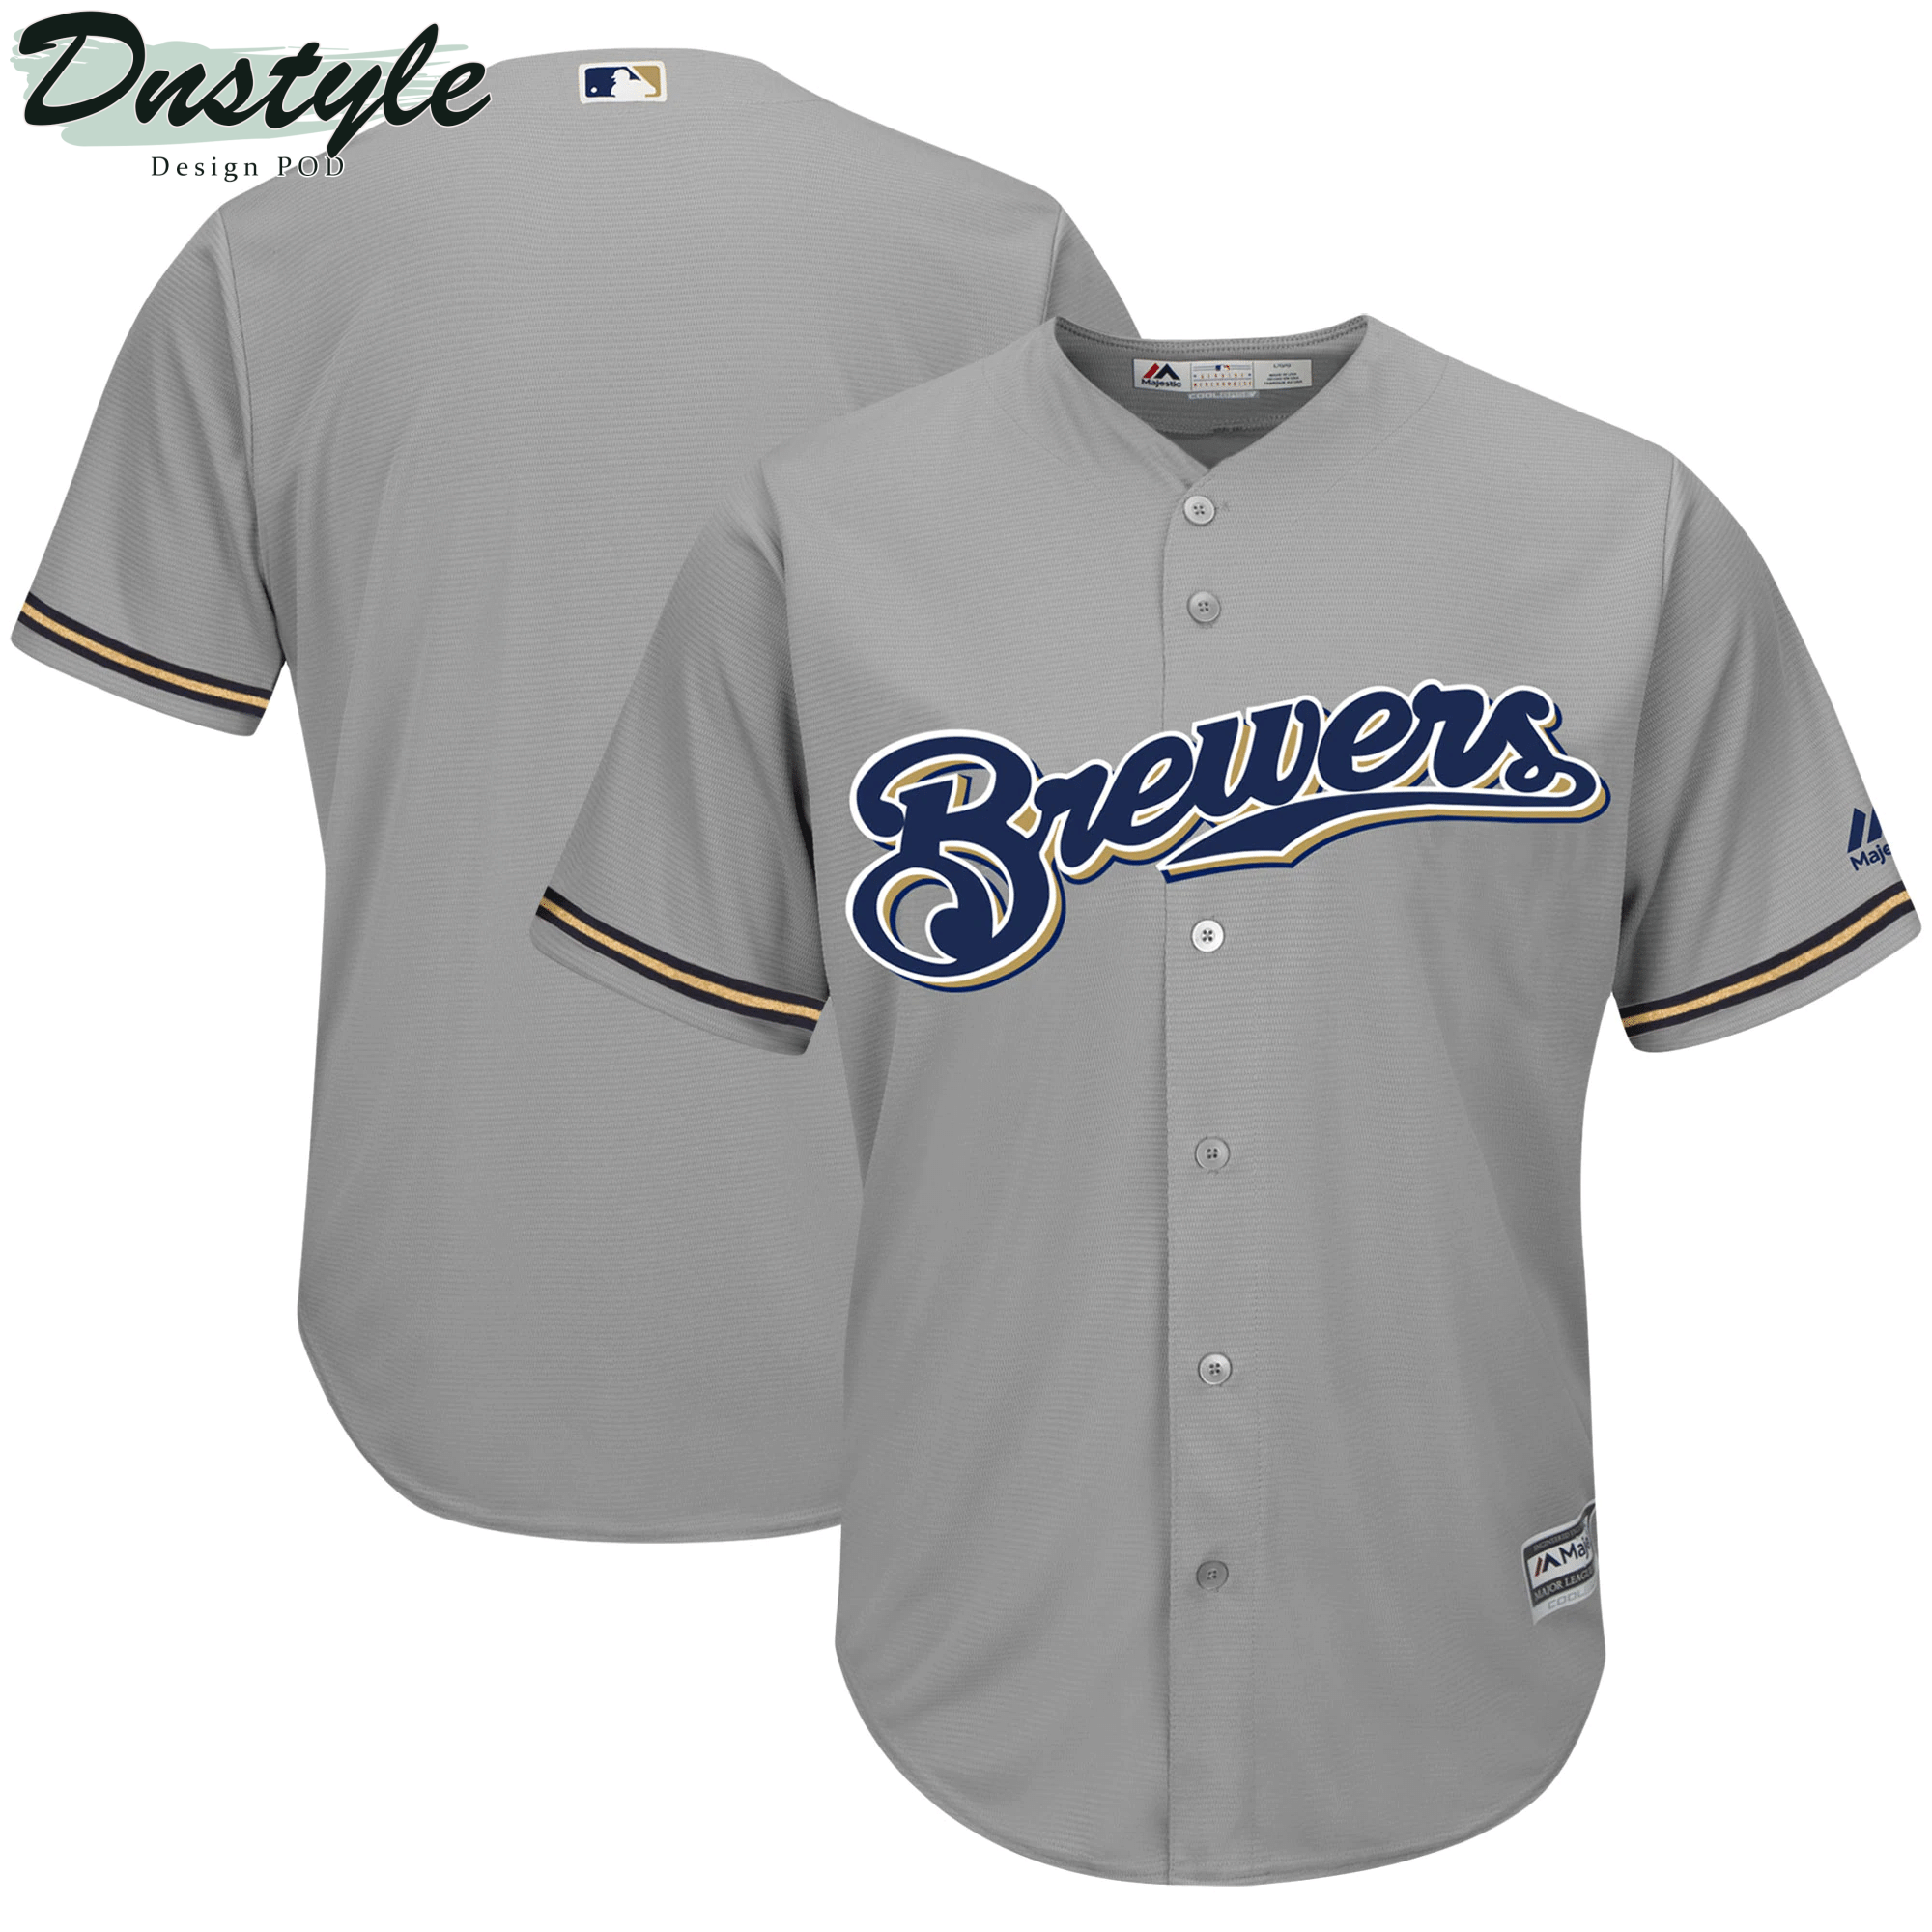 Men's Majestic Gray Milwaukee Brewers Team Official Jersey MLB Jersey